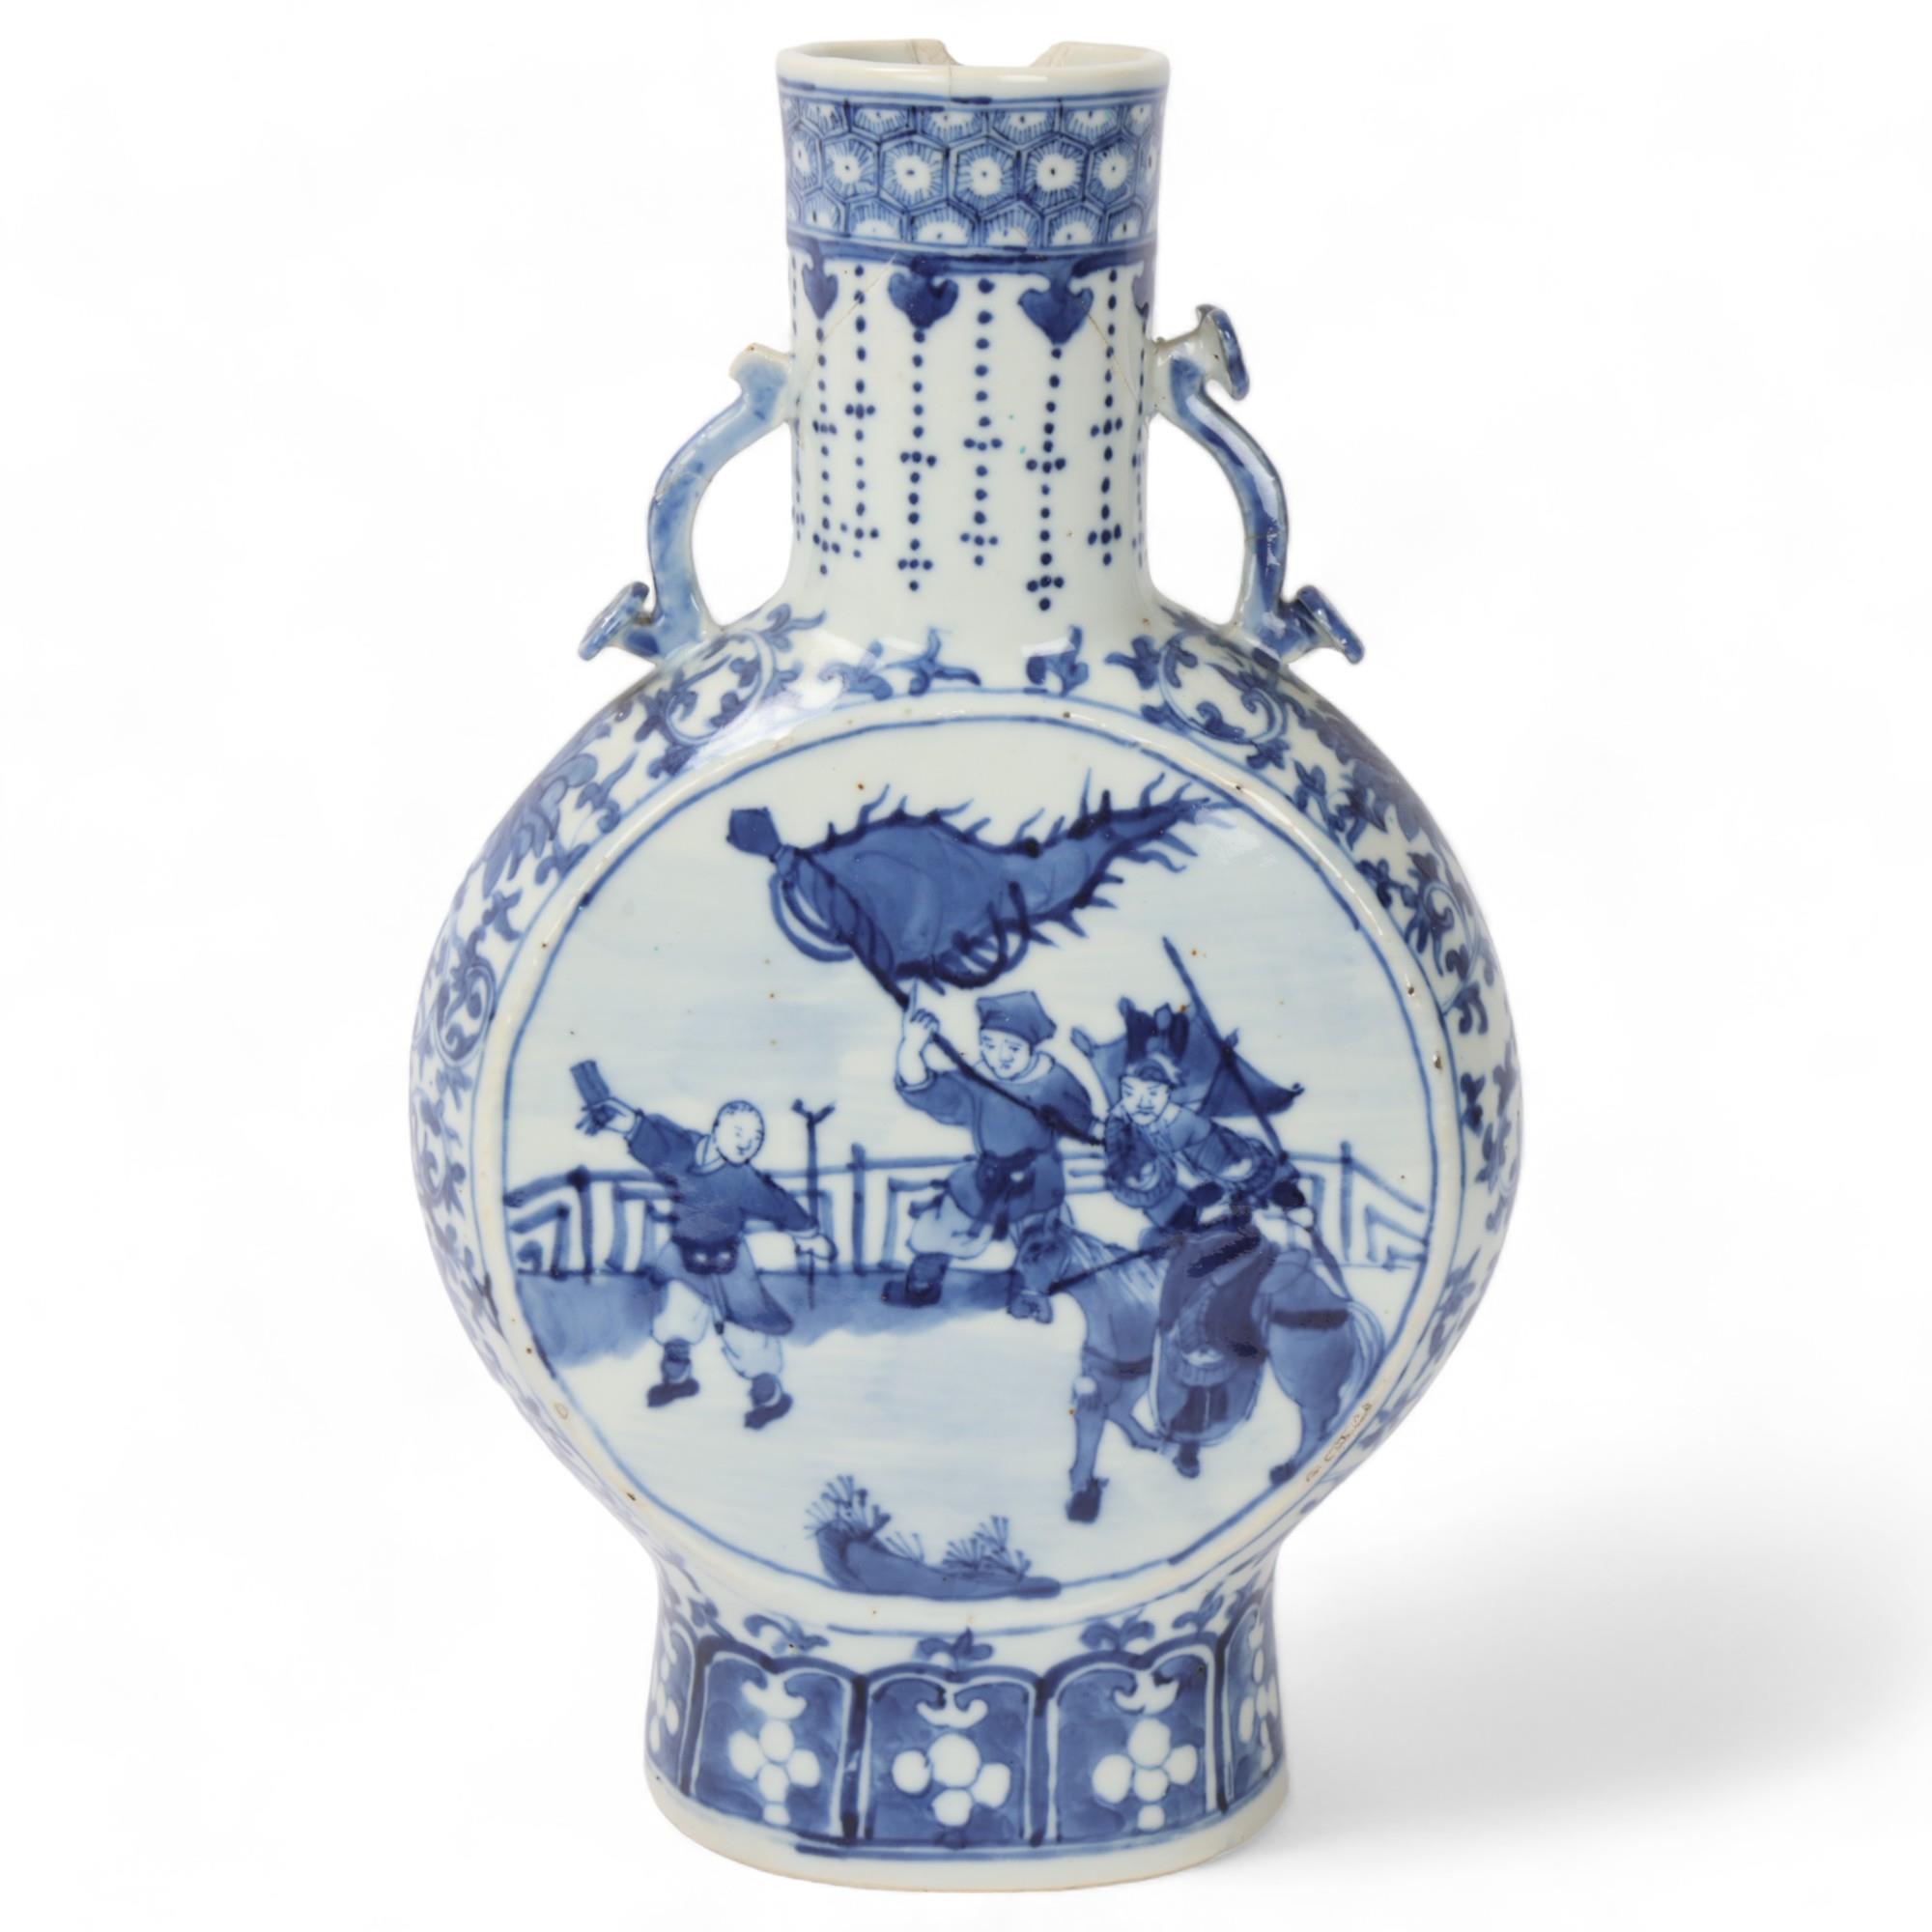 A Chinese blue and white porcelain moon-shaped vase, with sceptre neck handles and painted panels,